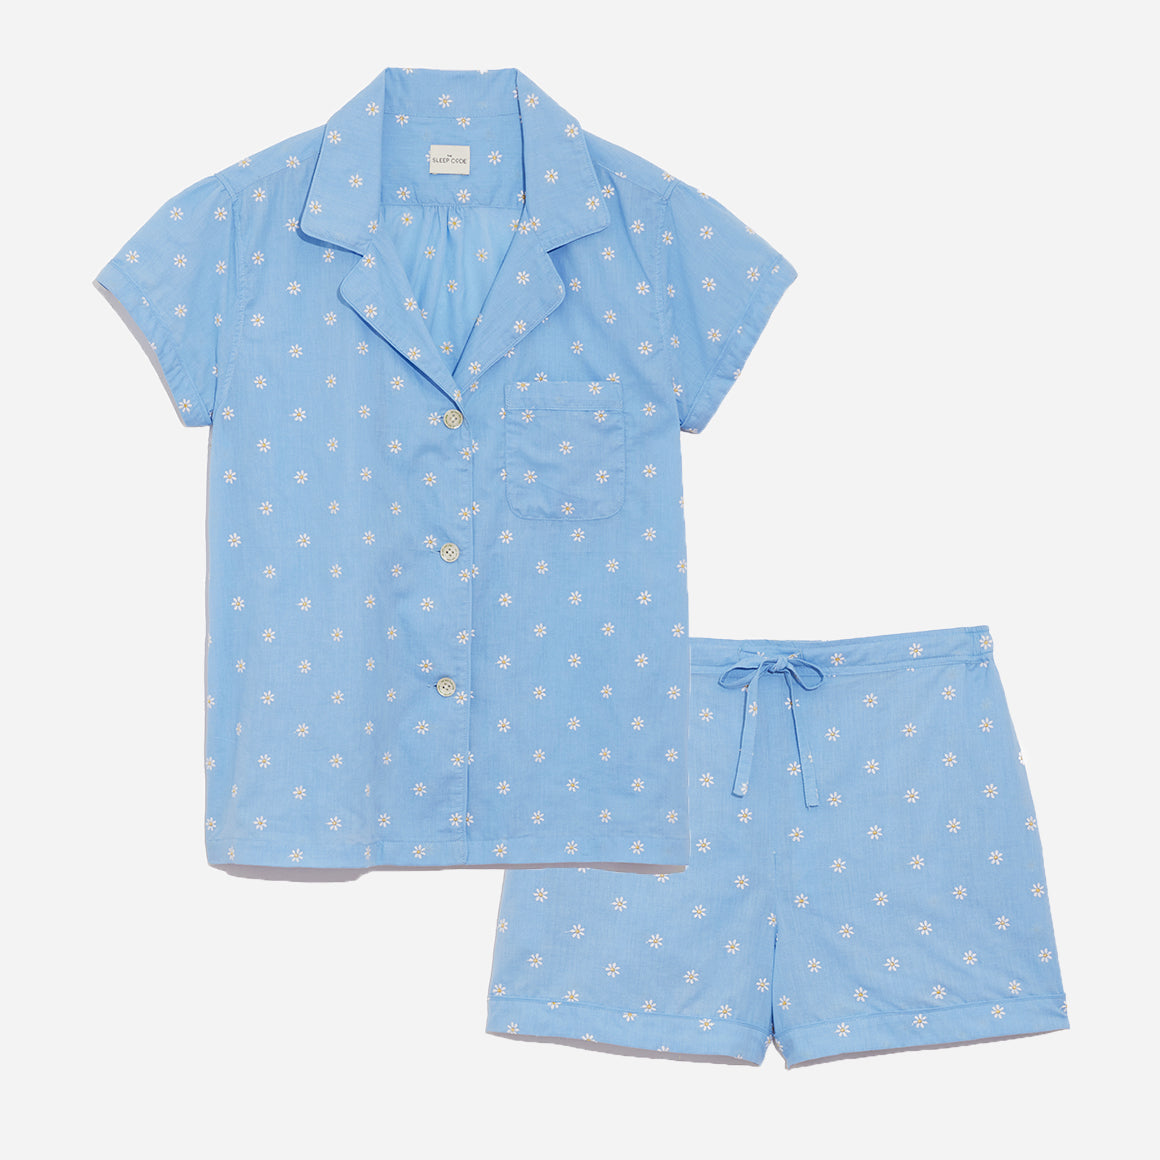 Our short sleeve pajama set features a relaxed fit. It includes a classic button-up top with a collar, while the matching shorts feature a comfortable elastic waistband, drawstring, and side-seam pockets.